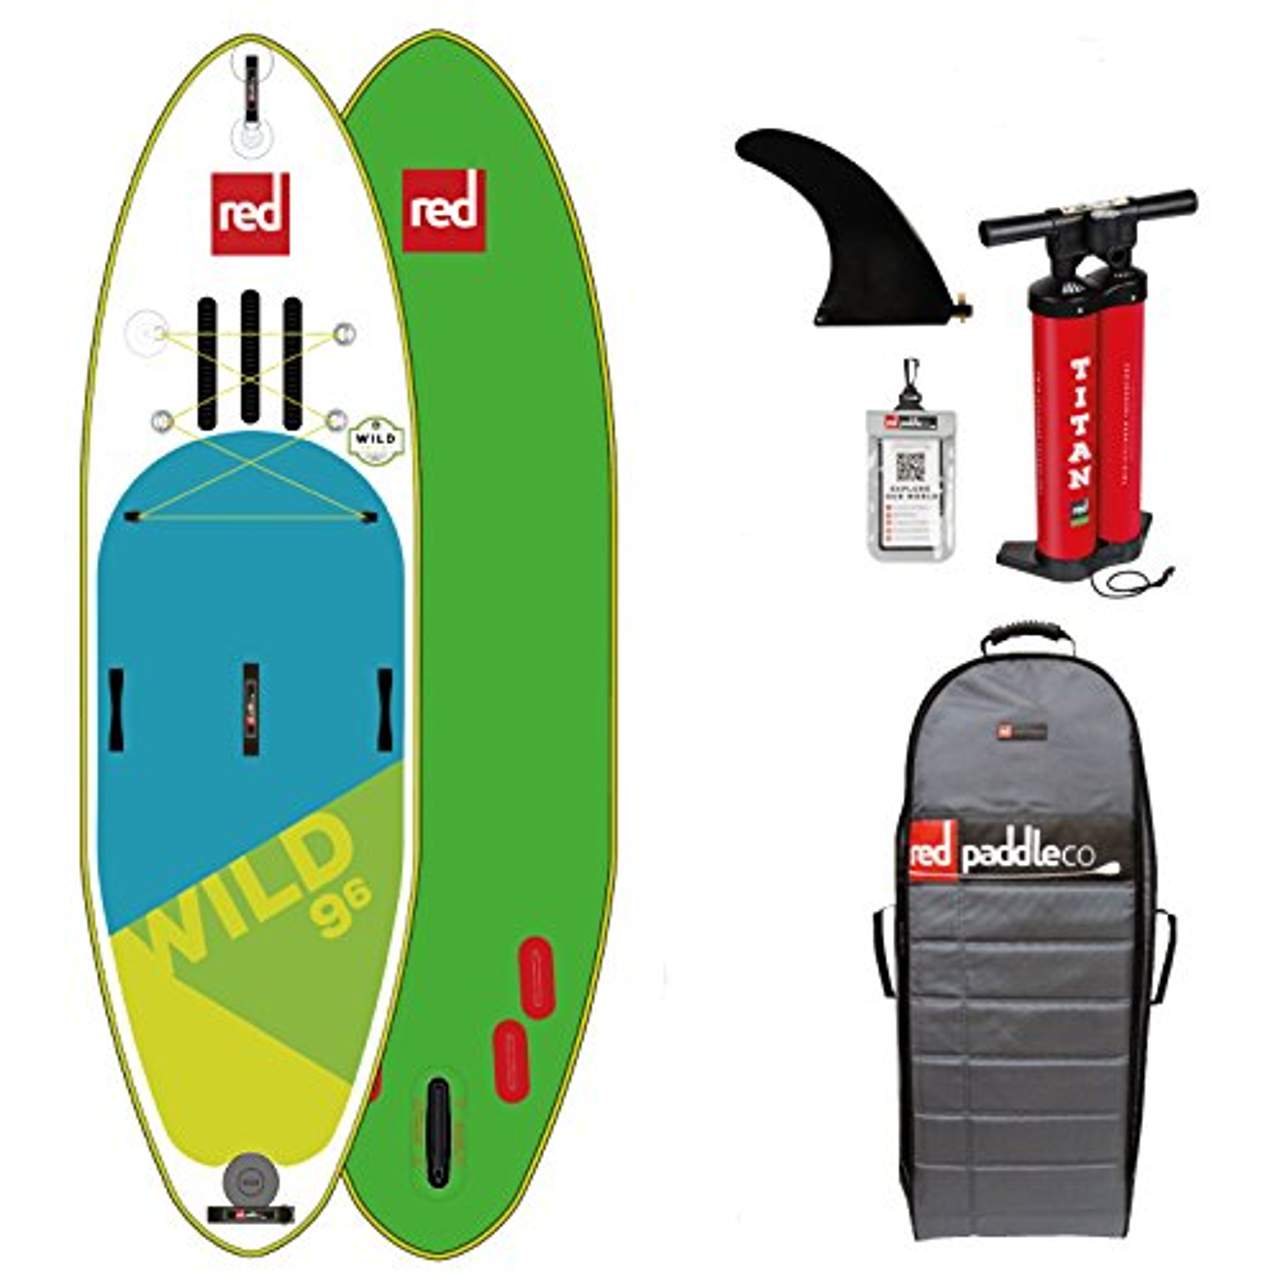 Red Paddle Co Wild 9.6' Stand up Paddle Wildwasser SUP